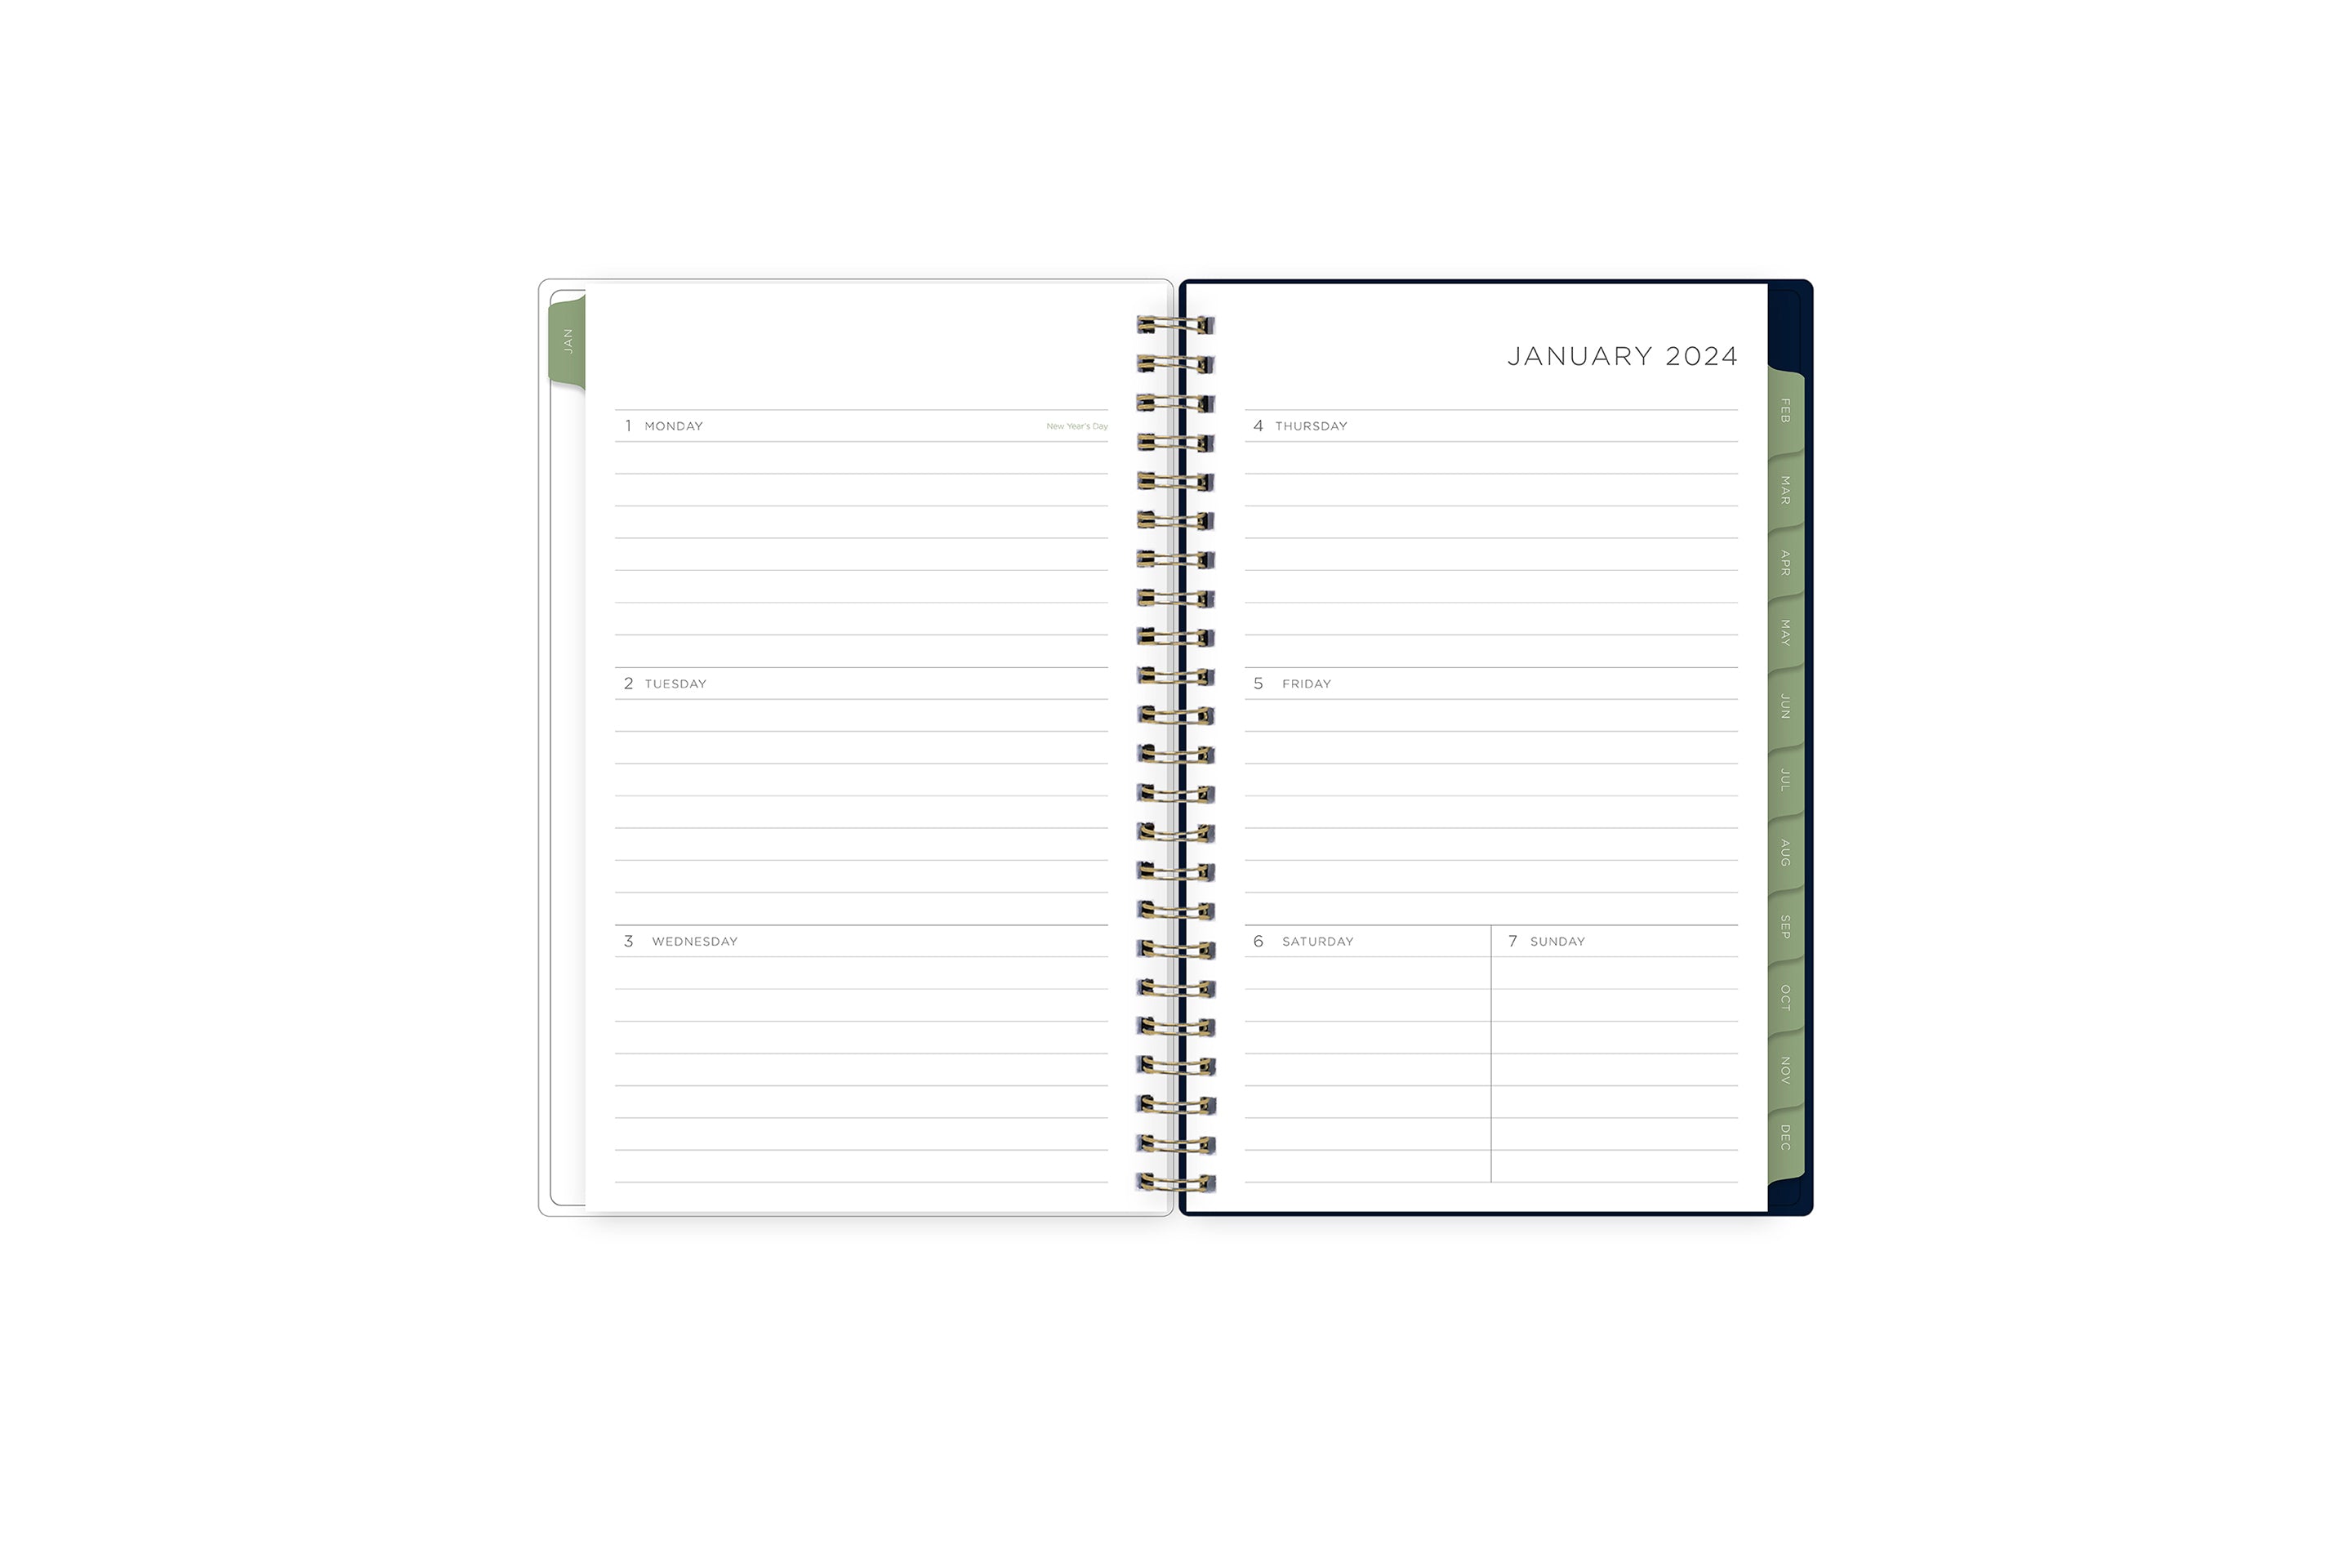 The 2024 Kelly Ventura special collection features a monthly spread with boxed days, clean white writing space, rfeference calendars, and soft olive green monthly tabs in a 5x8 planner size.